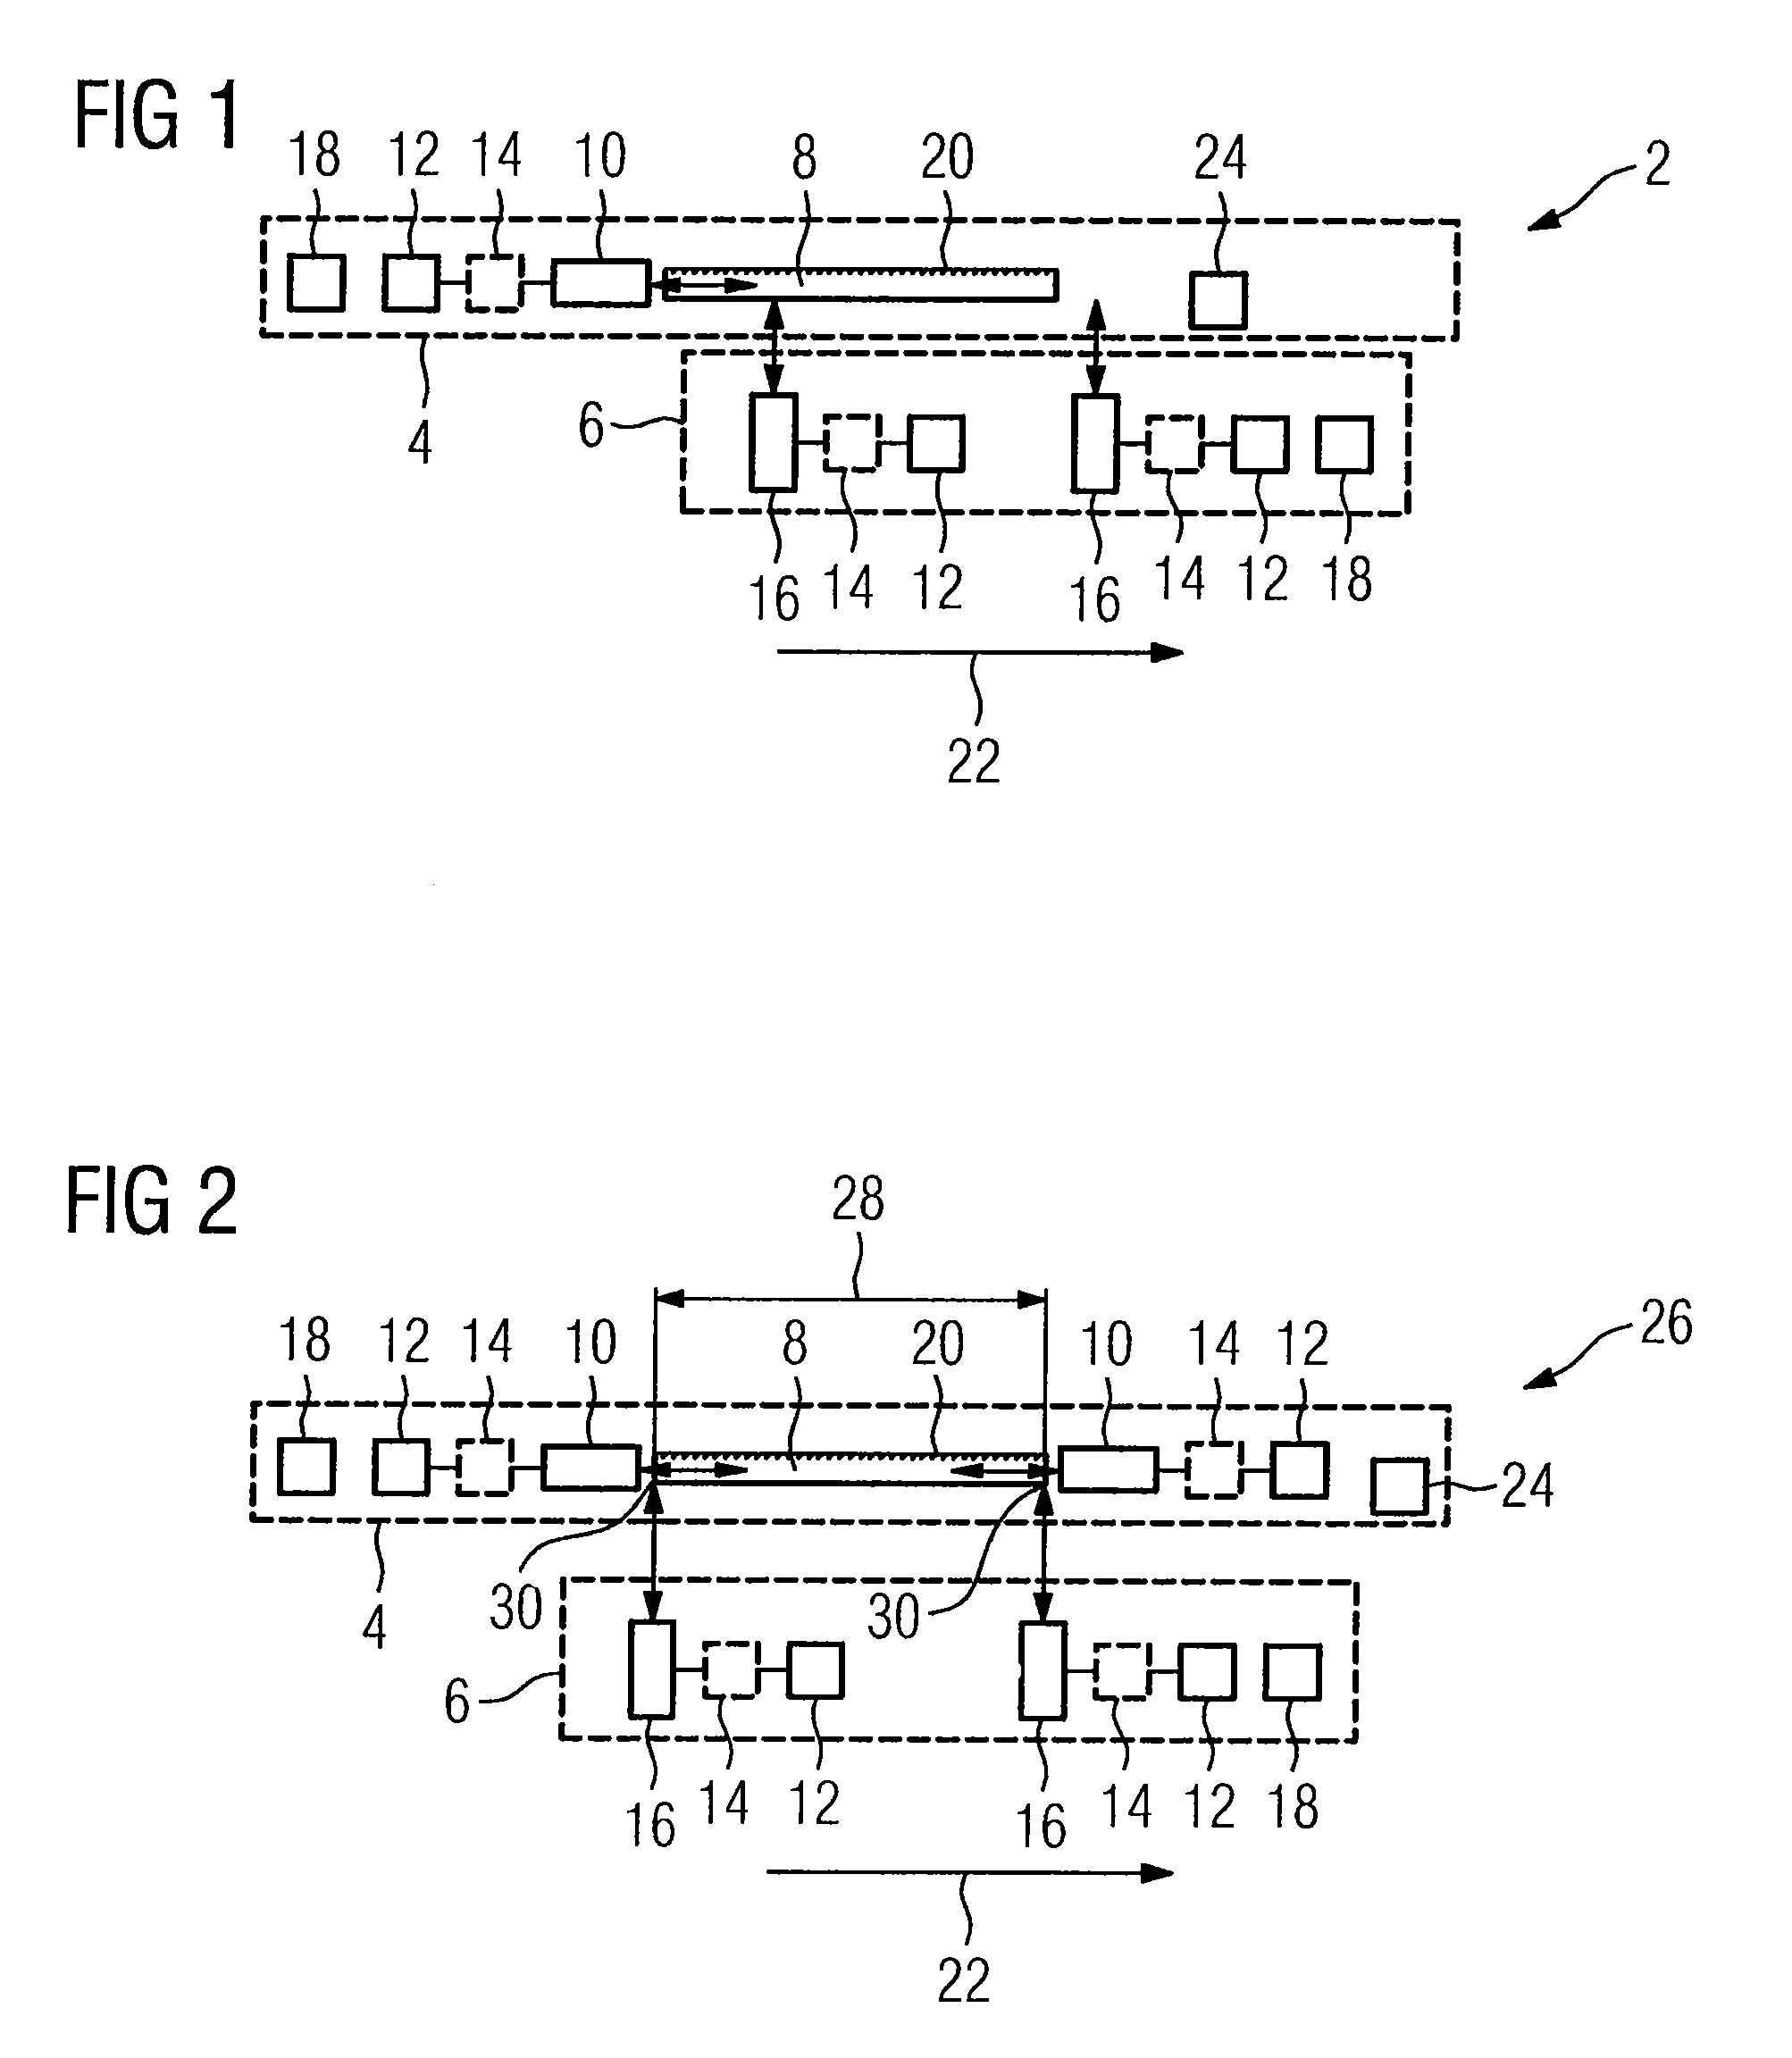 Apparatus for transmitting data between two systems which move relative to one another